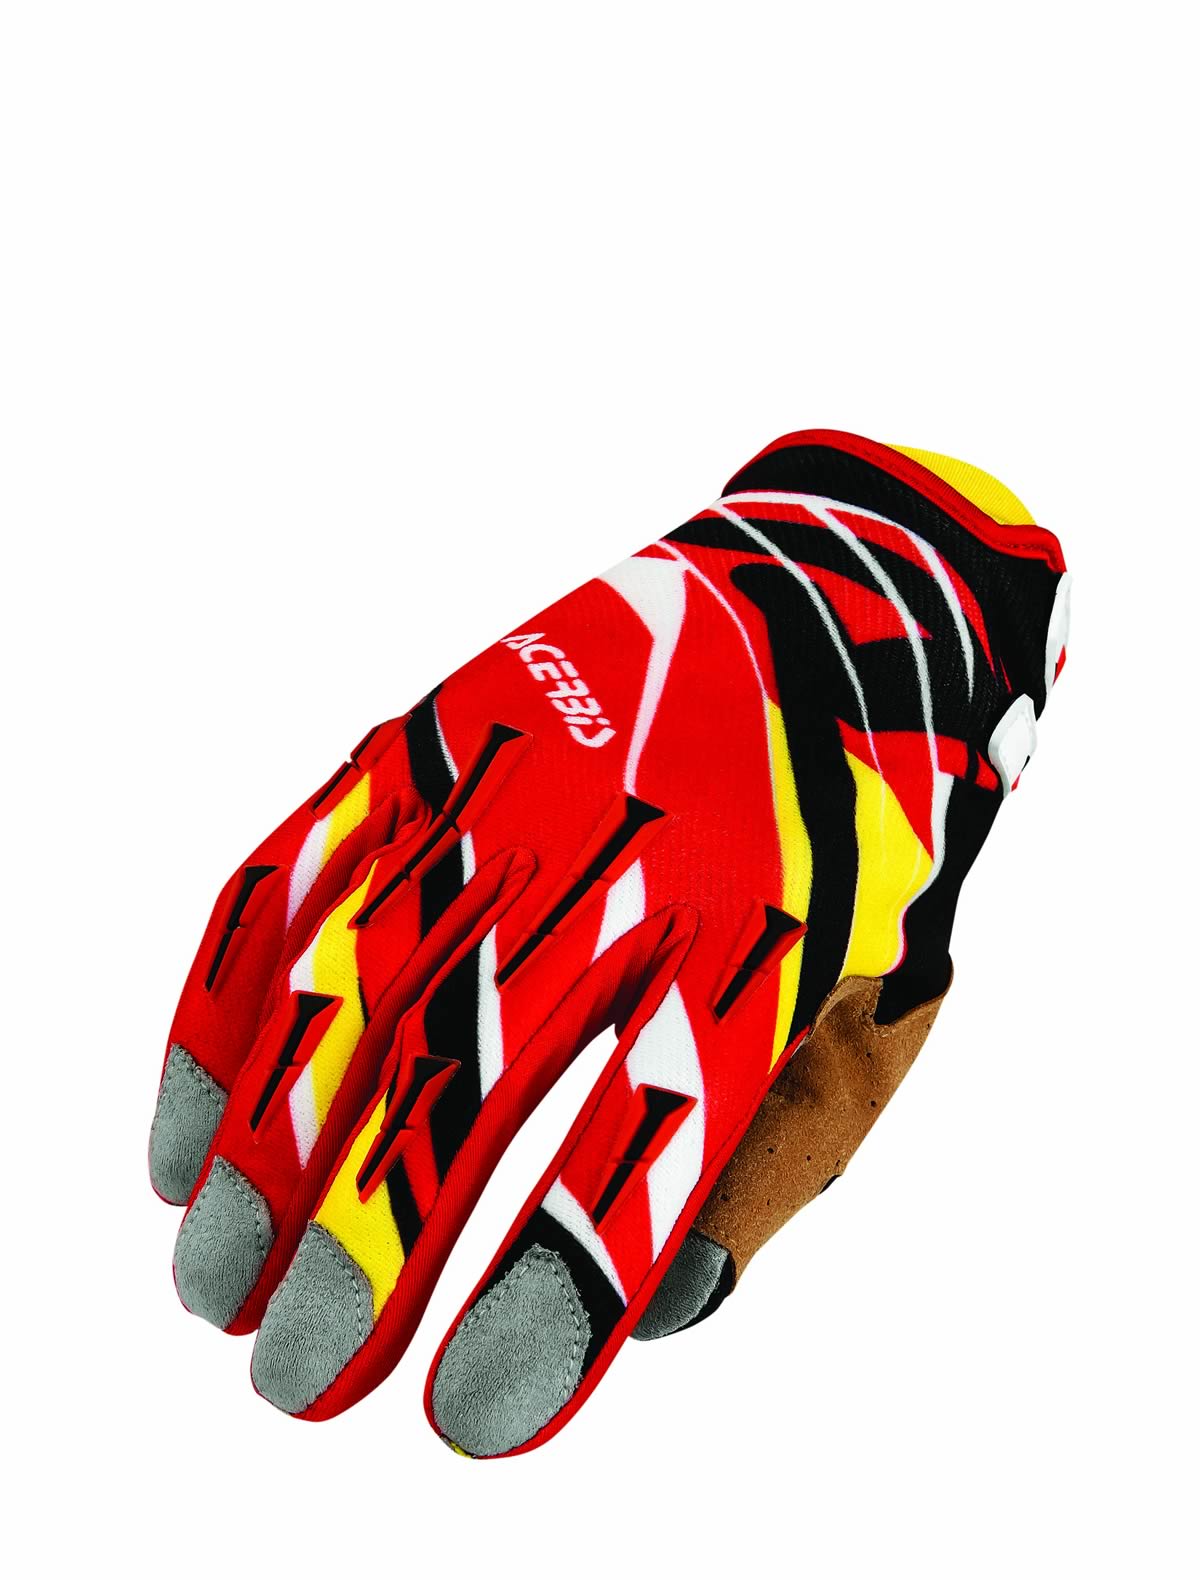 **MX X2 GLOVE Red/Yellow NOW £8